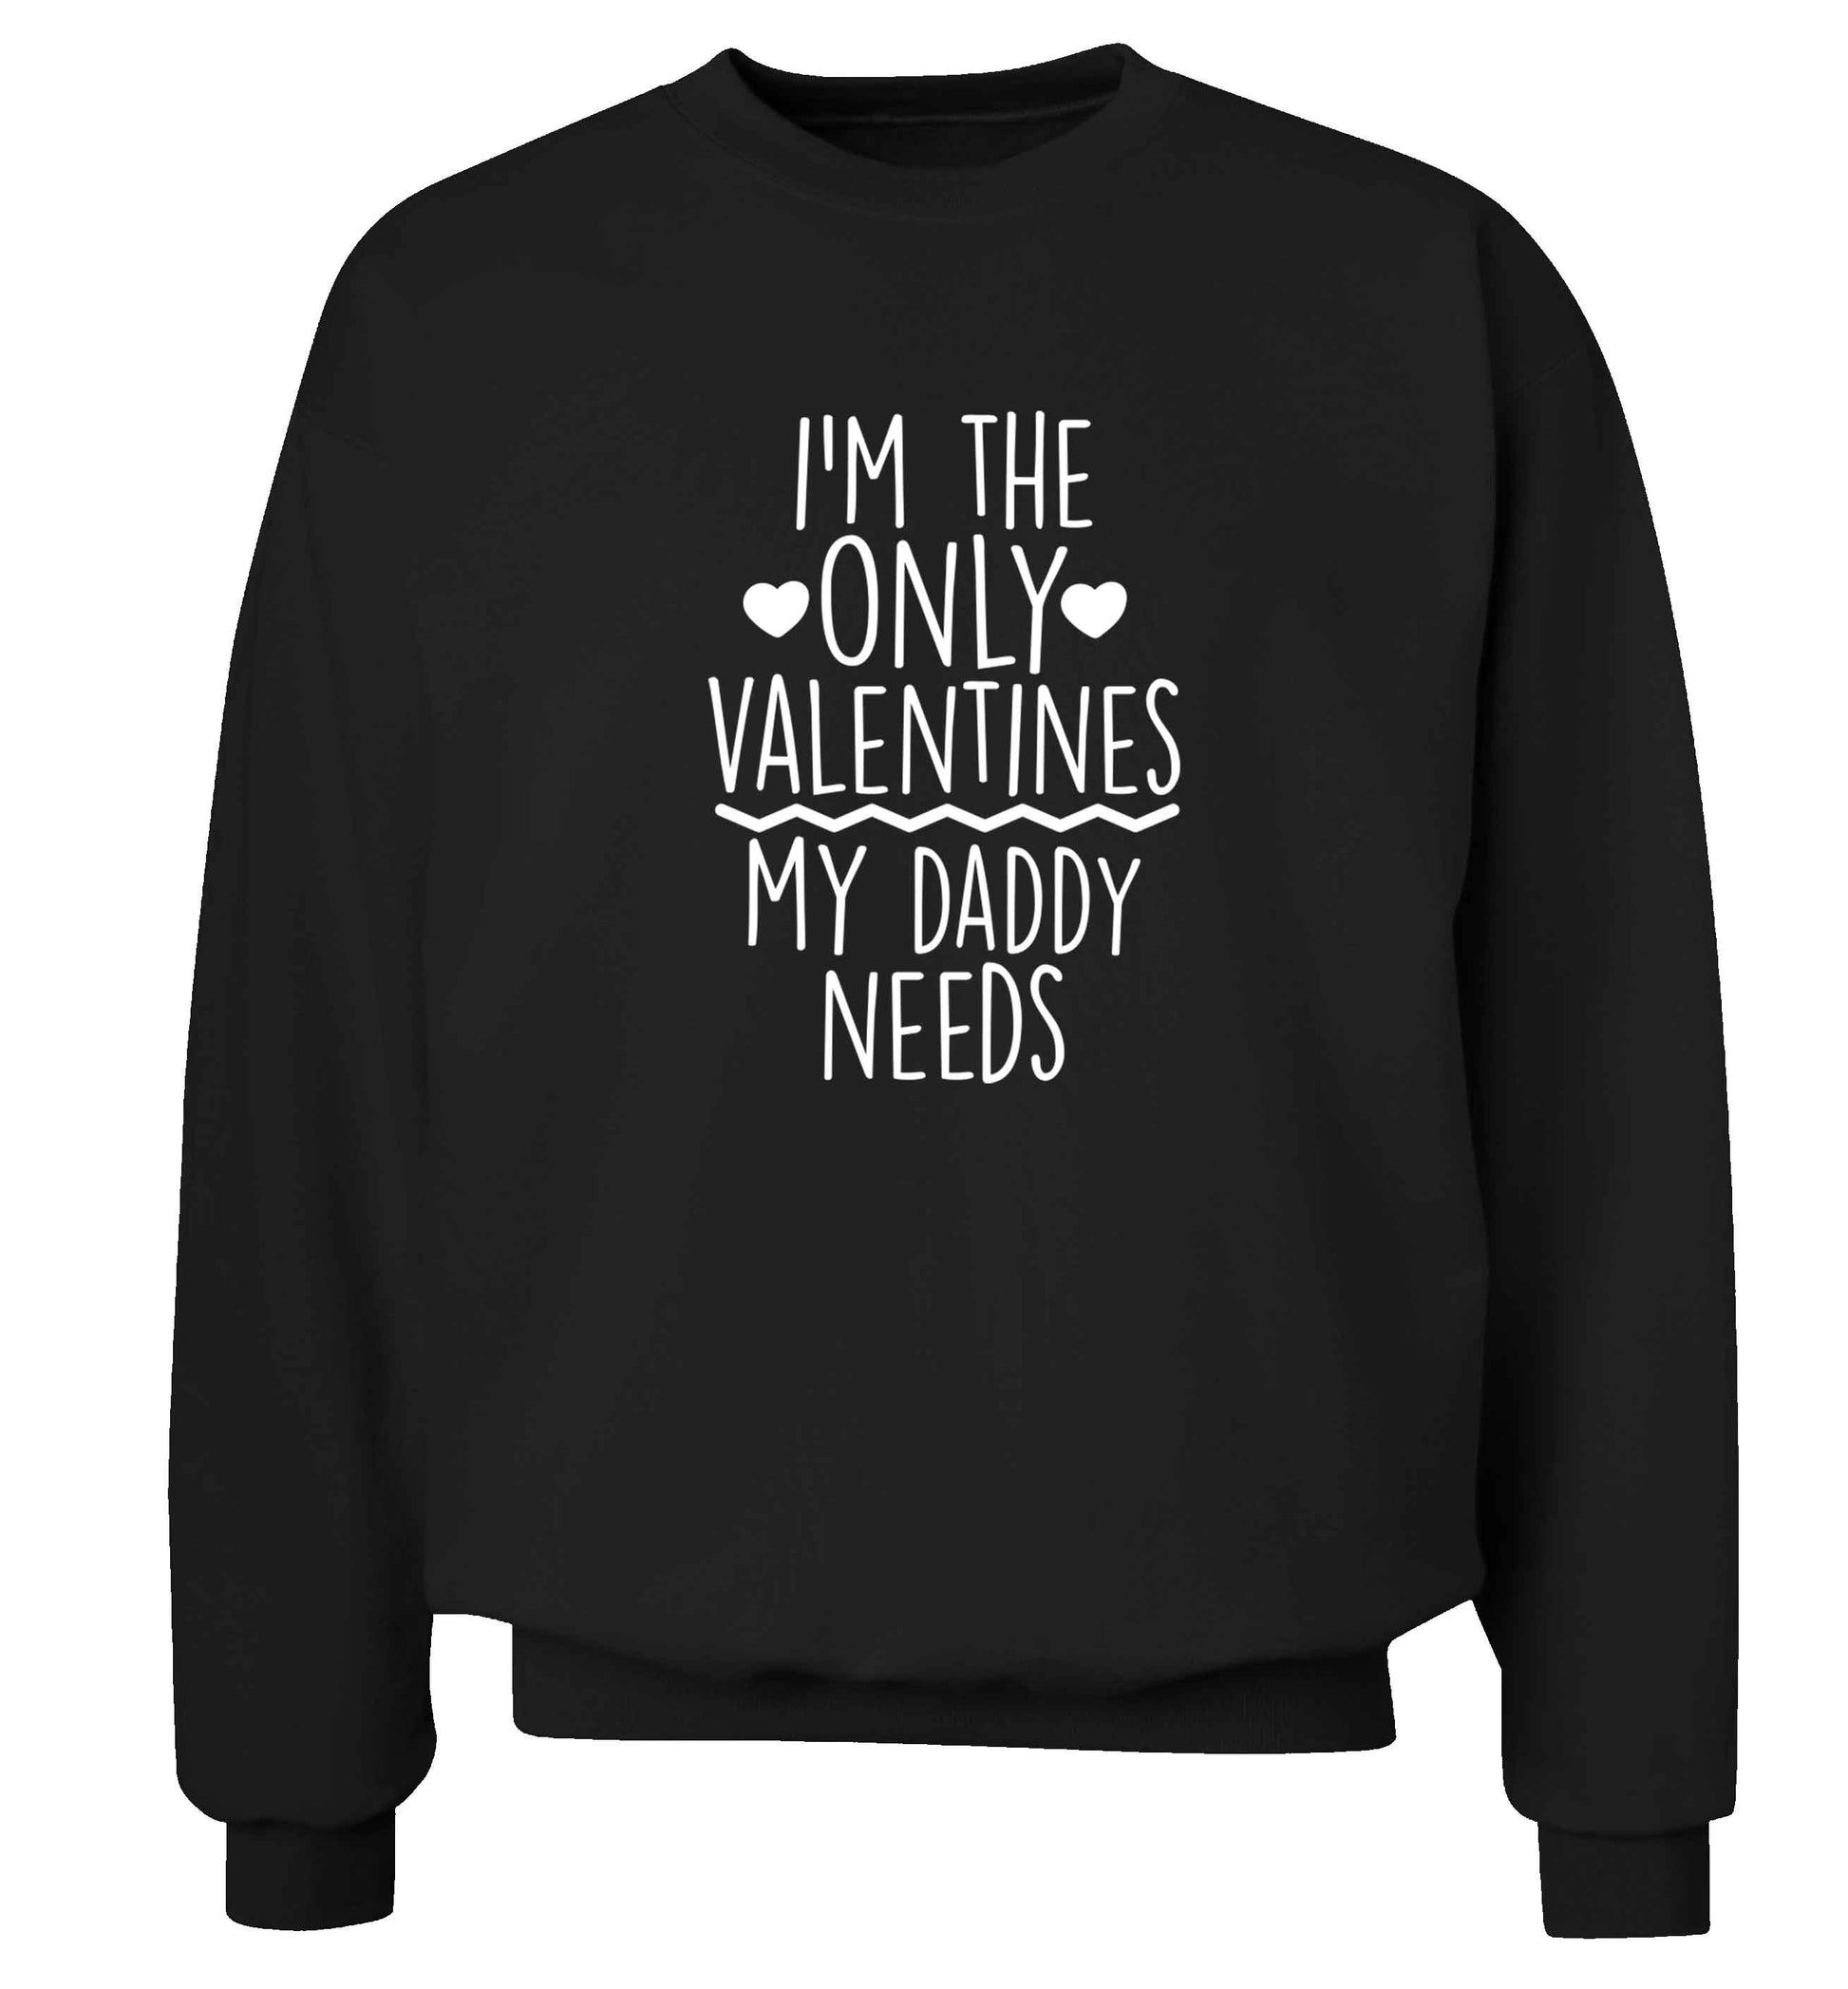 I'm the only valentines my daddy needs adult's unisex black sweater 2XL